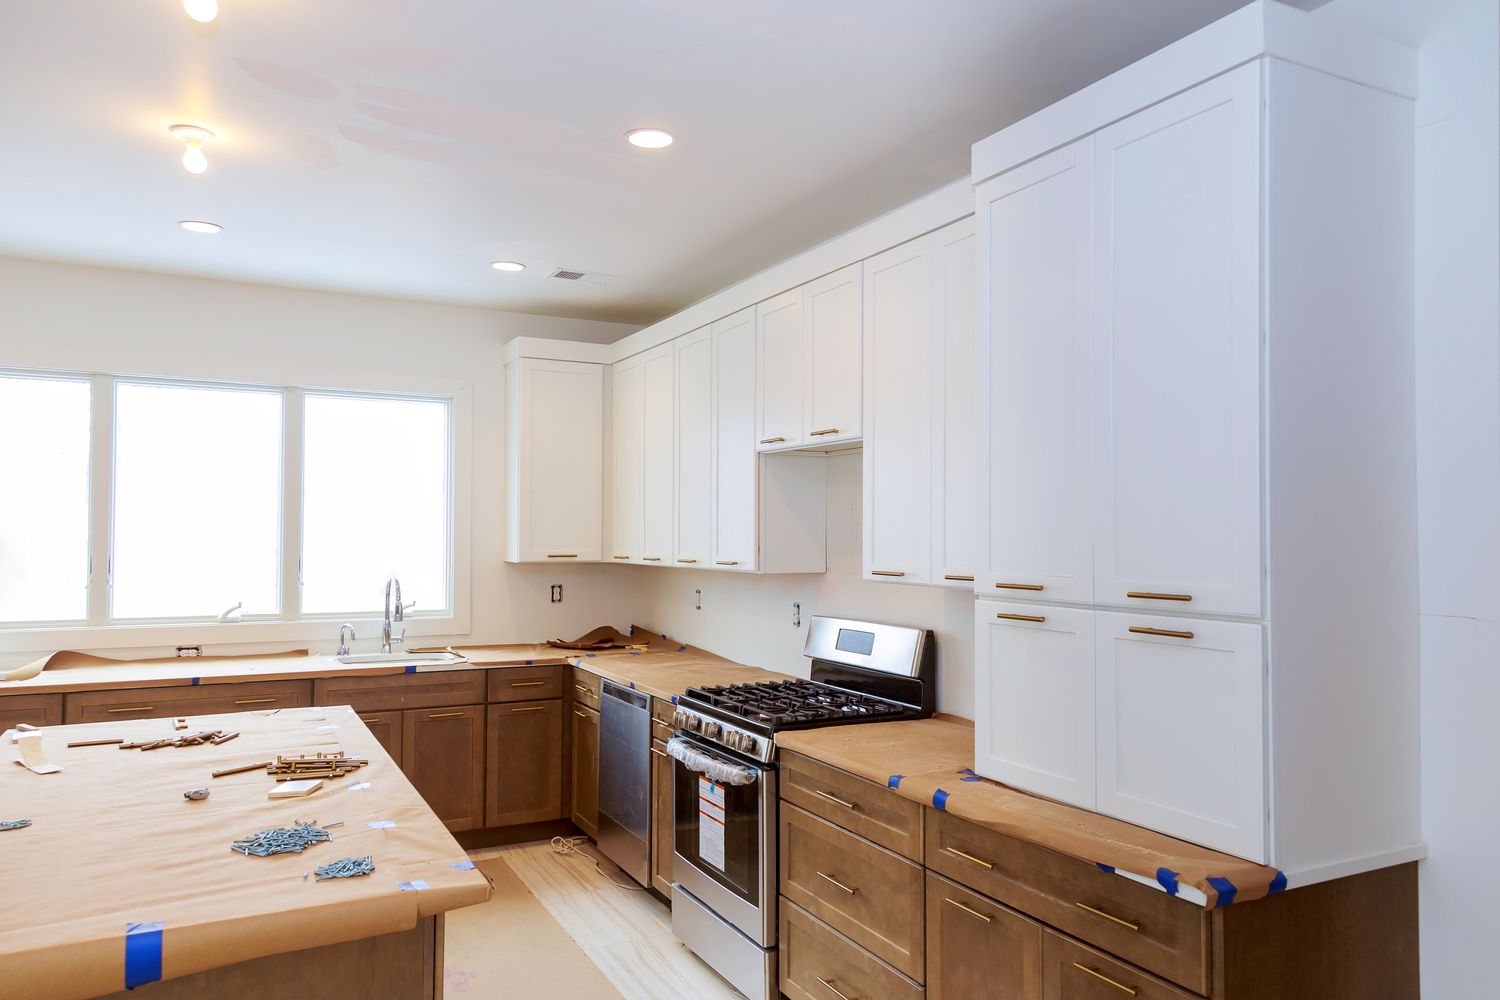 3 Proven Marketing Strategies for Countertop & Cabinet Specialists